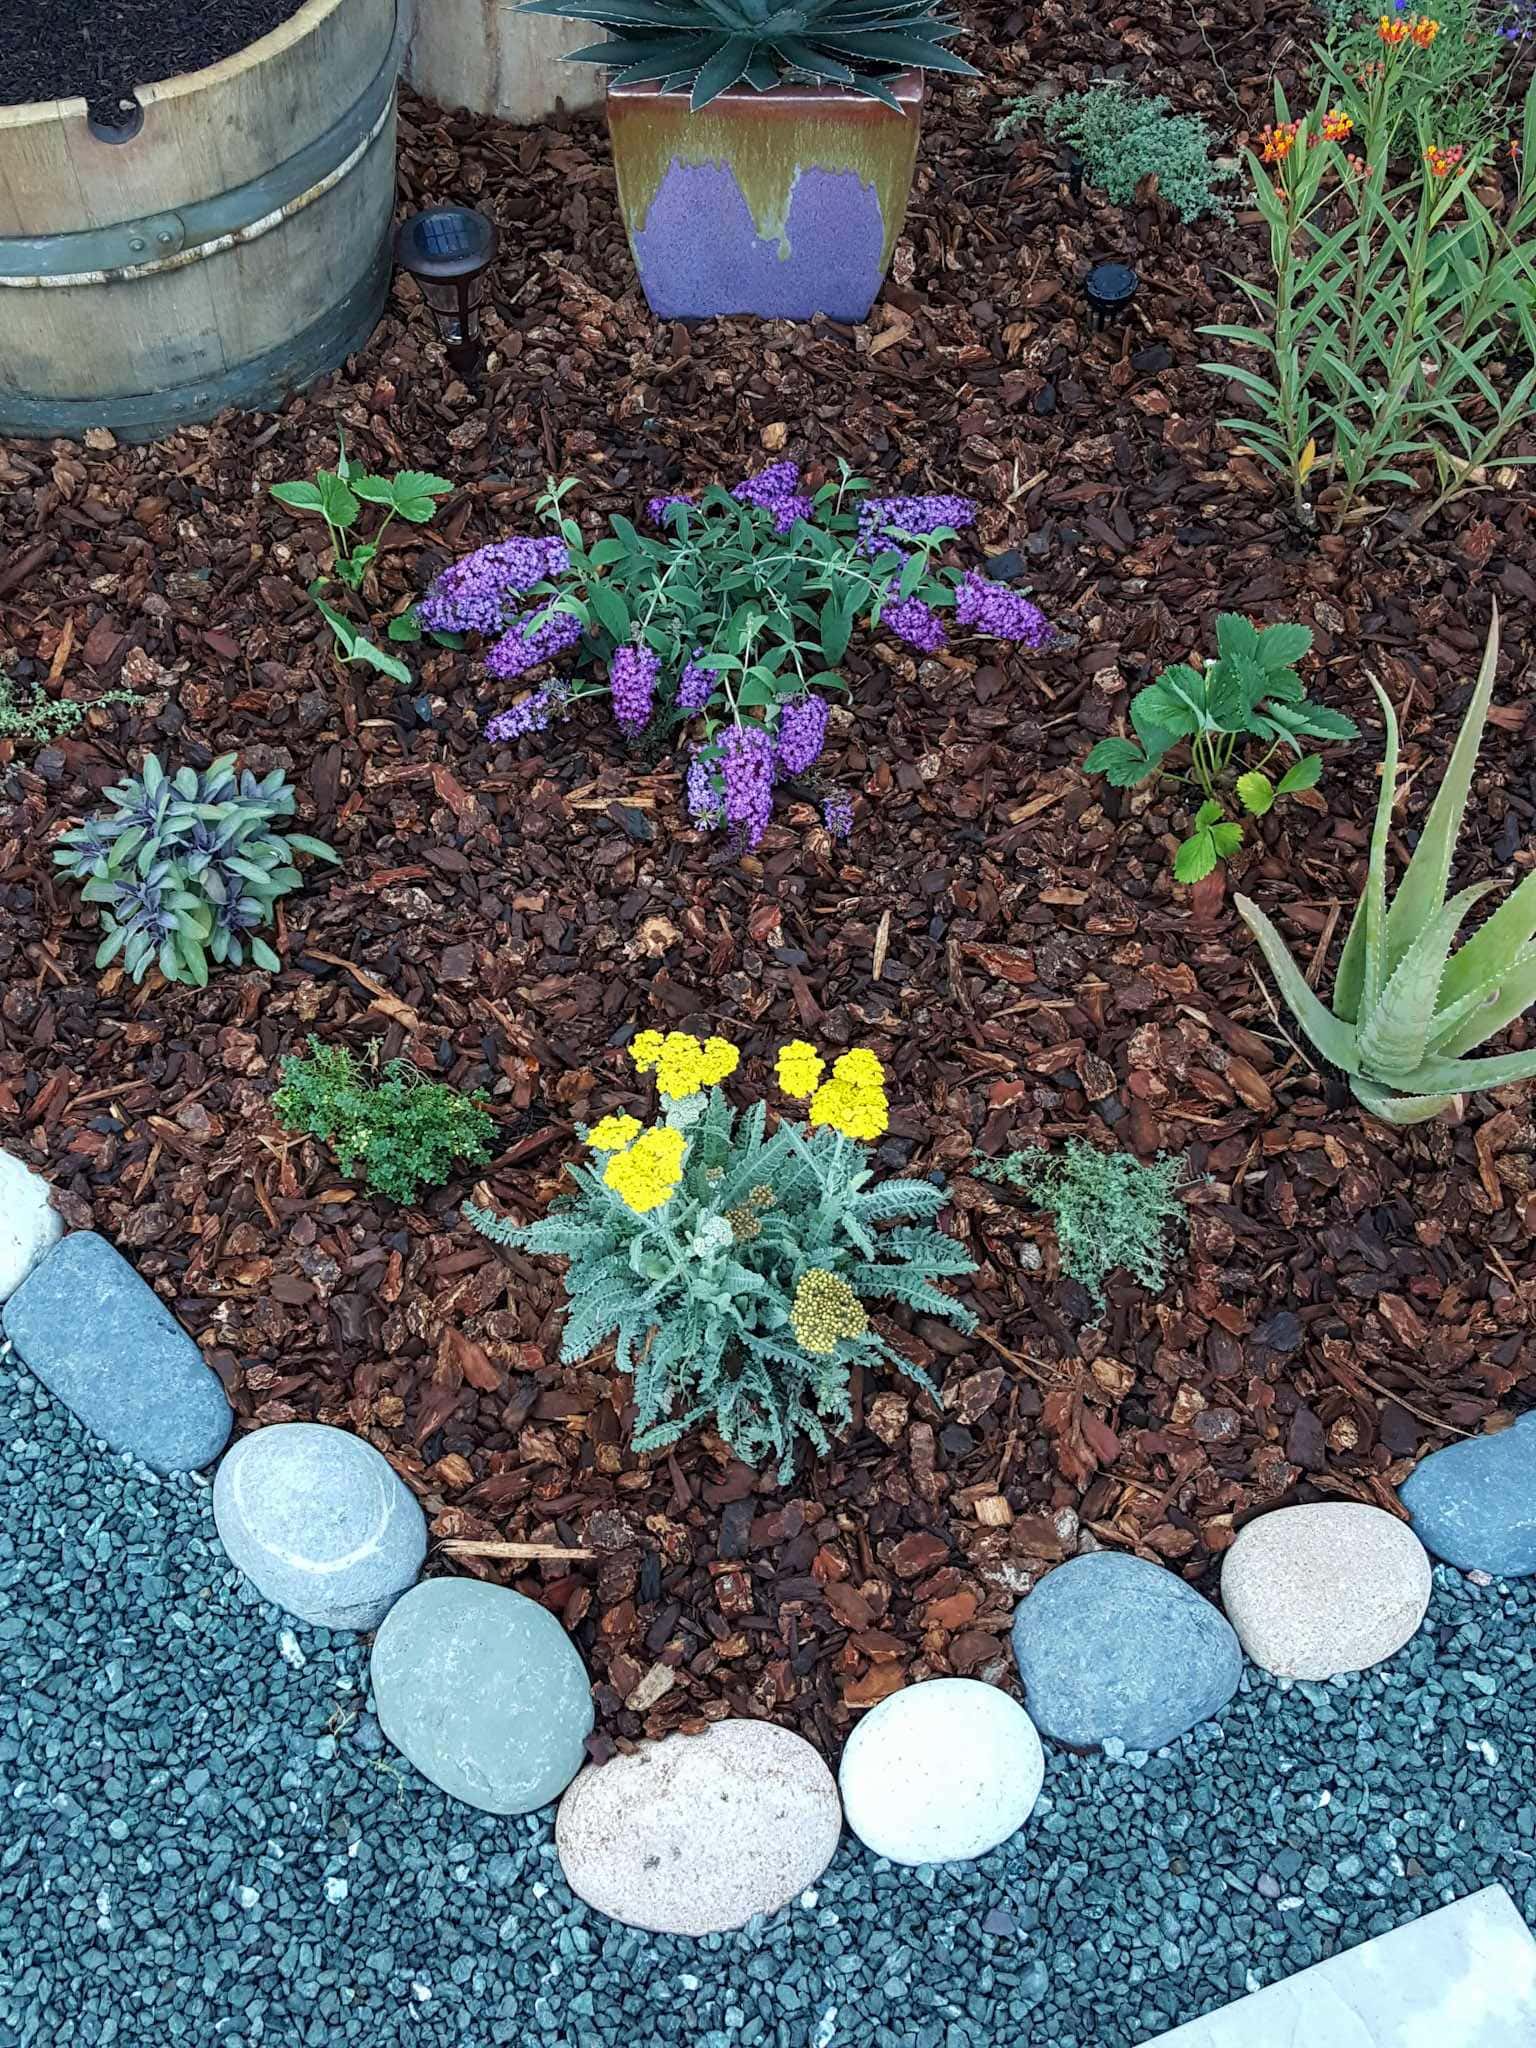 The corner of a pollinator island section of the front yard garden. The edges are lined with cobblestone with gravel pathways on the outside. Inside the islands there are various perennial plants consisting of yarrow, agave, aloe, edible sage, strawberries, milkweed and various other herbs. It is mulched with small redwood bark mulch. 